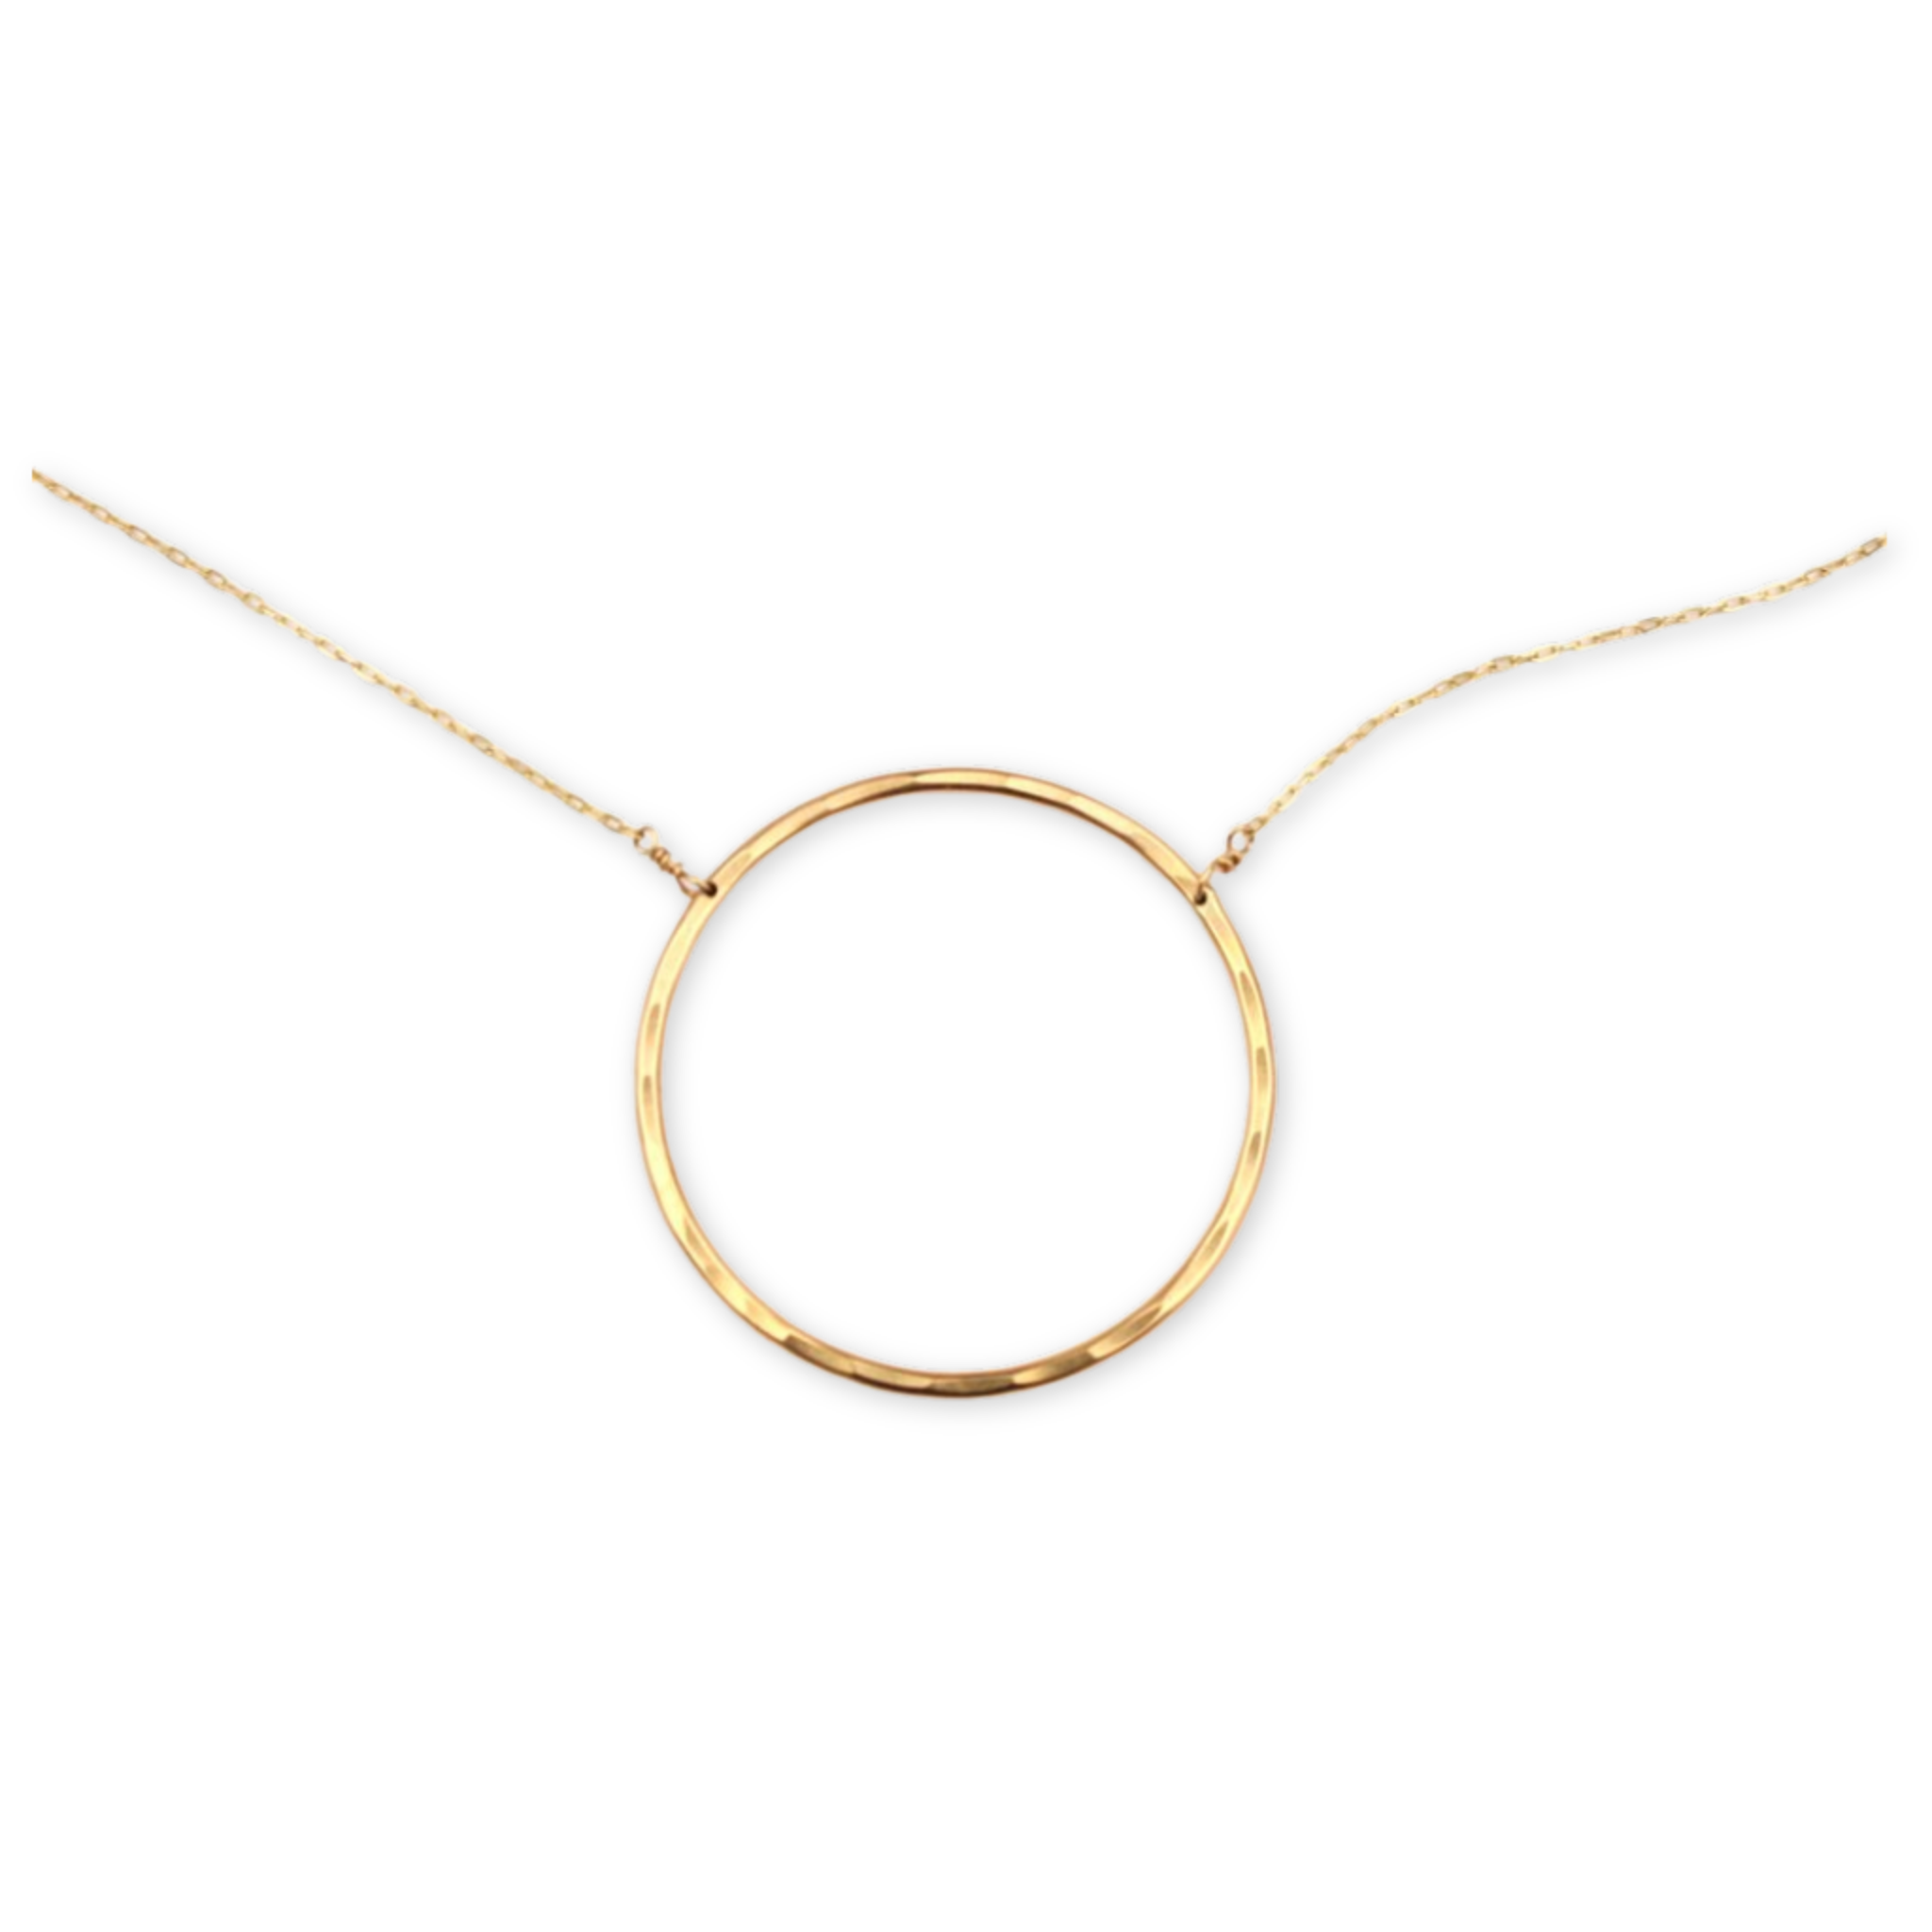 round hammered circle pendant handing on delicate chain necklace